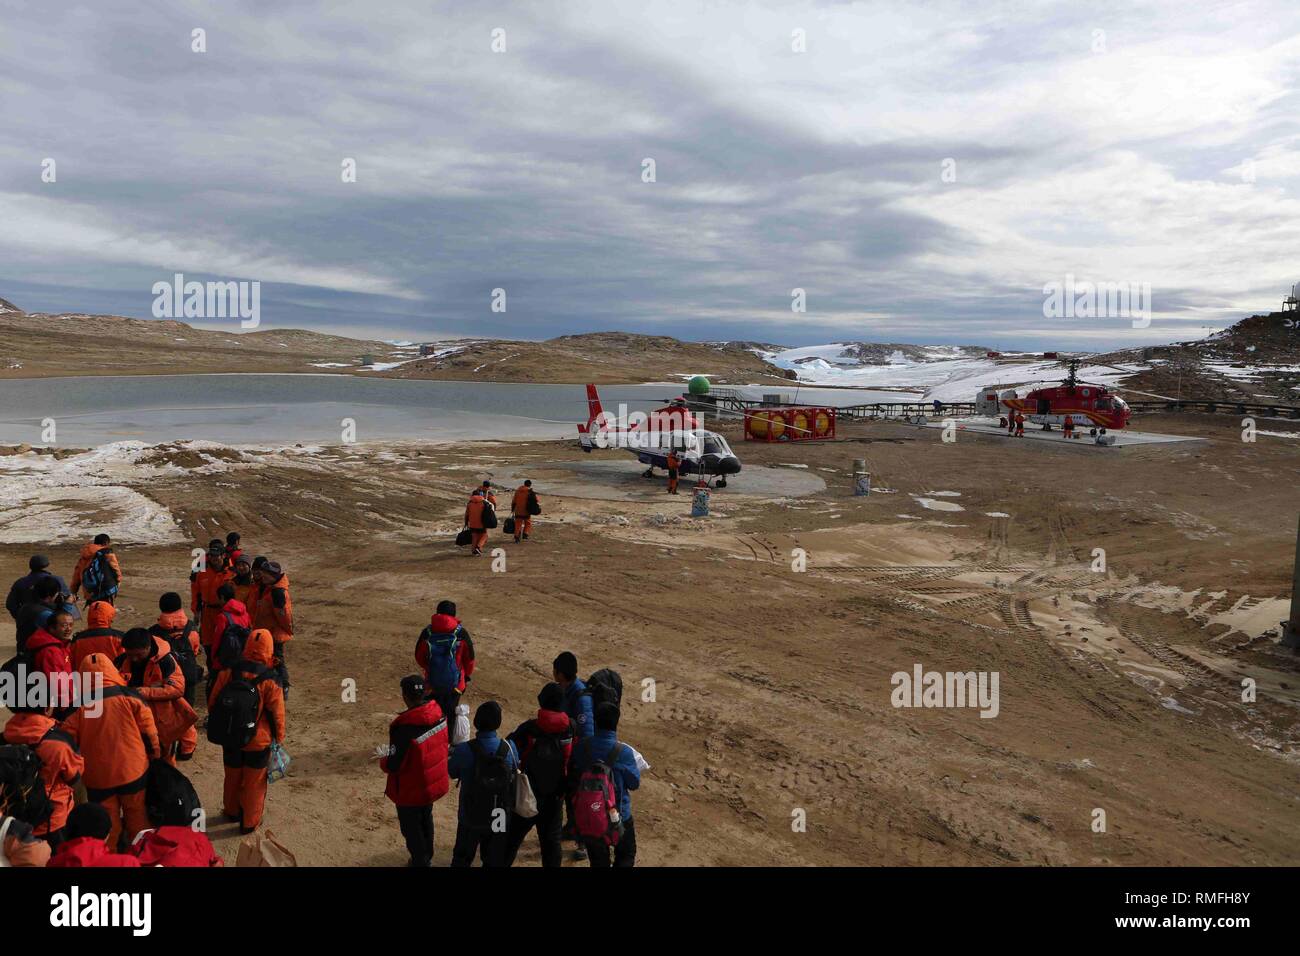 Aboard Xuelong. 13th Feb, 2019. A helicopter picks up members of China's 35th Antarctic expedition team from the Zhongshan Station to China's research icebreaker Xuelong, Feb. 13, 2019. China's research icebreaker Xuelong, with 126 crew members aboard on the 35th Antarctic research mission, on Thursday local time left the Zhongshan Station on its way back to China. Snow Eagle 601, China's first fixed-wing aircraft for polar flight, on Thursday night also departed from the Antarctic after completing all assignments. Credit: Liu Shiping/Xinhua/Alamy Live News Stock Photo